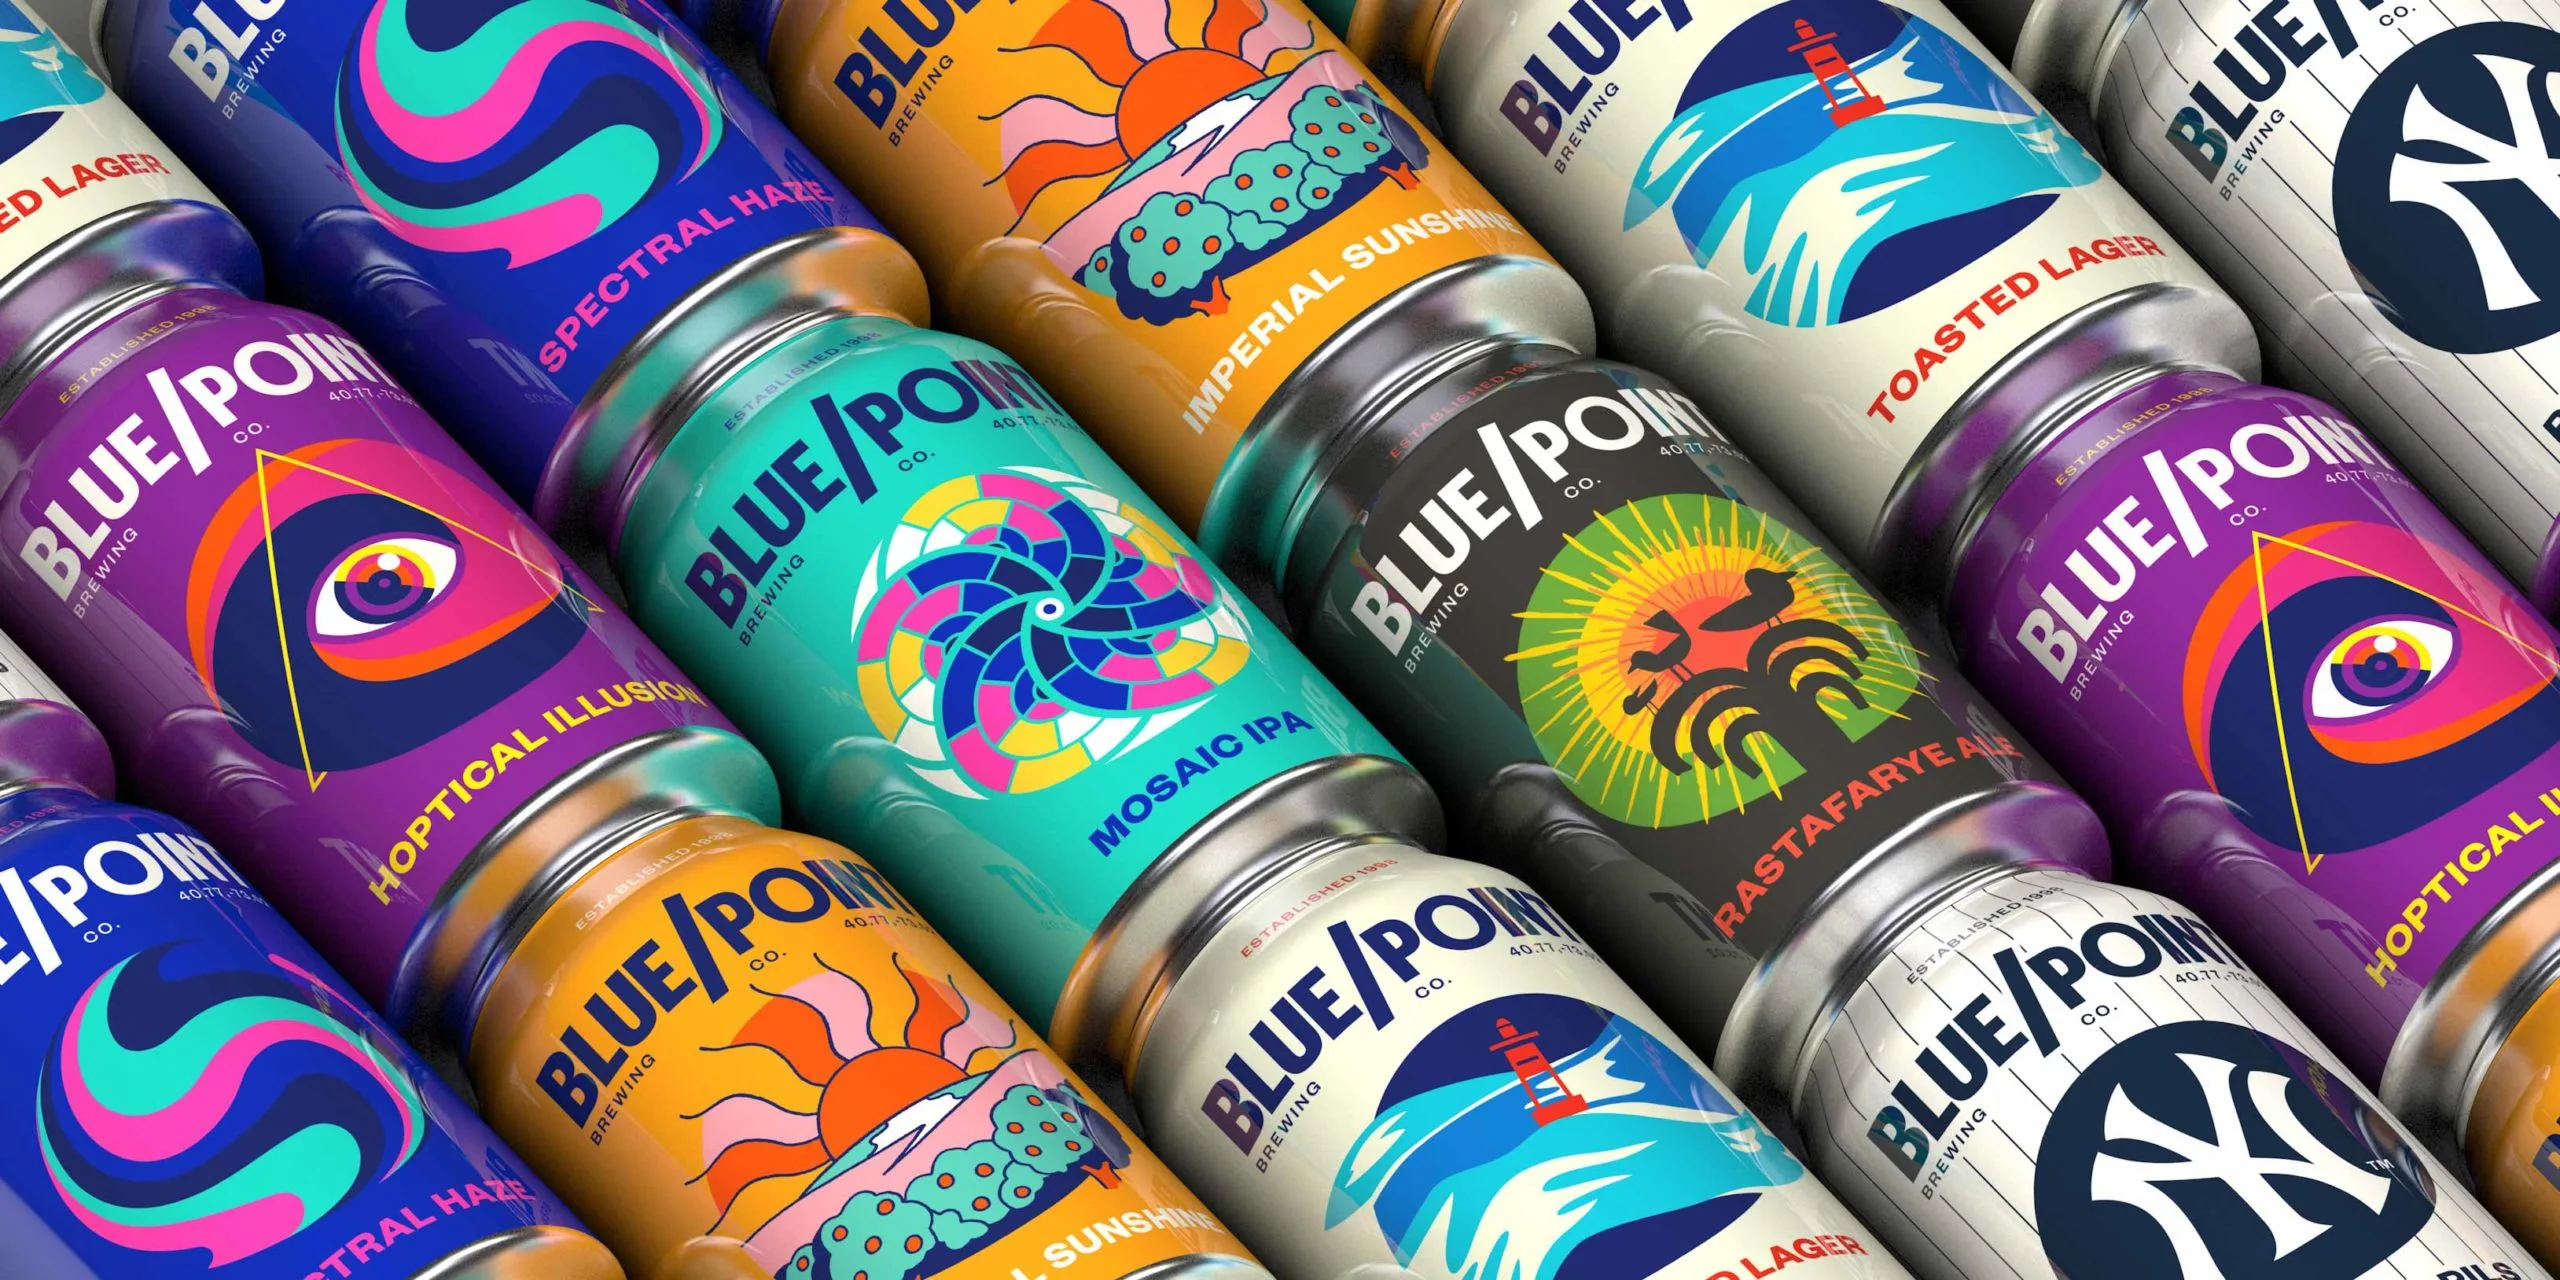 Array of Blue Point Brewing Co. cans